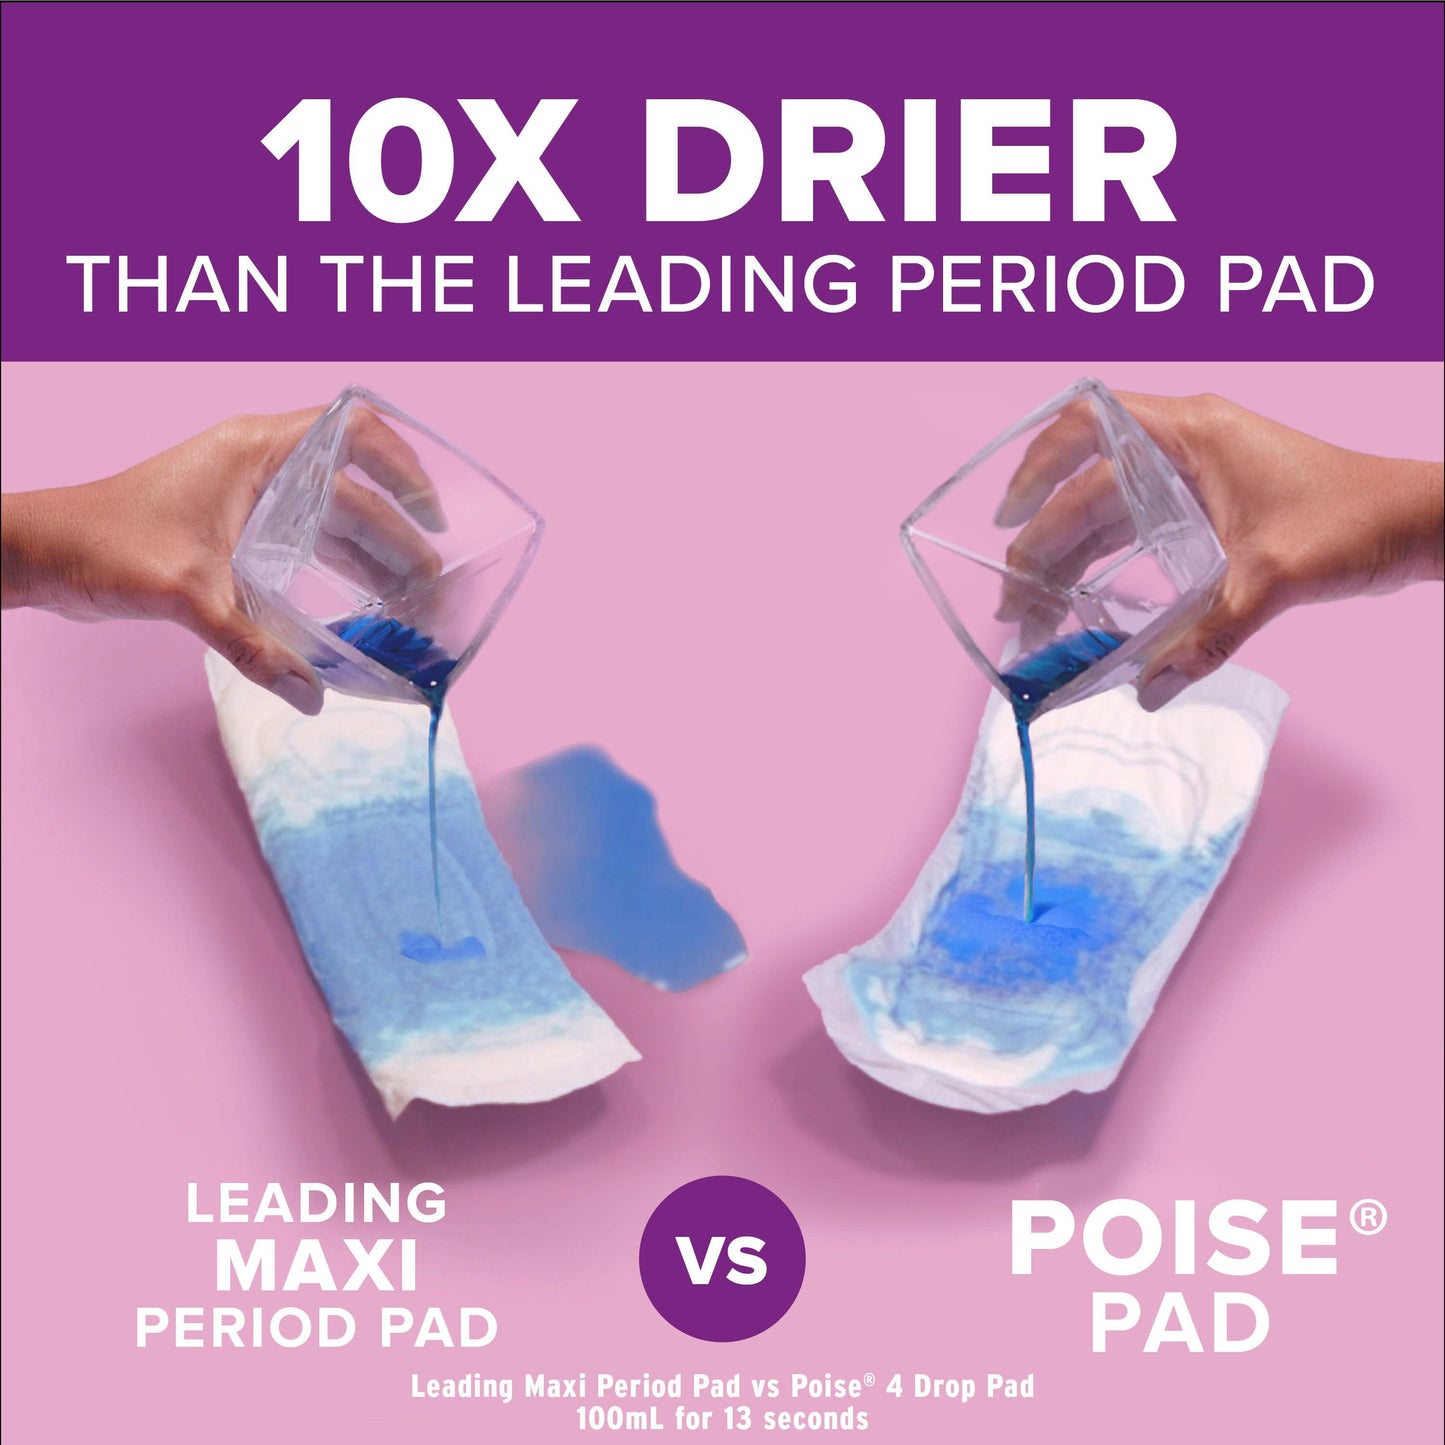 Poise Incontinence Pads for Women, 4 Drop, Moderate Absorbency, Regular, 20Ct